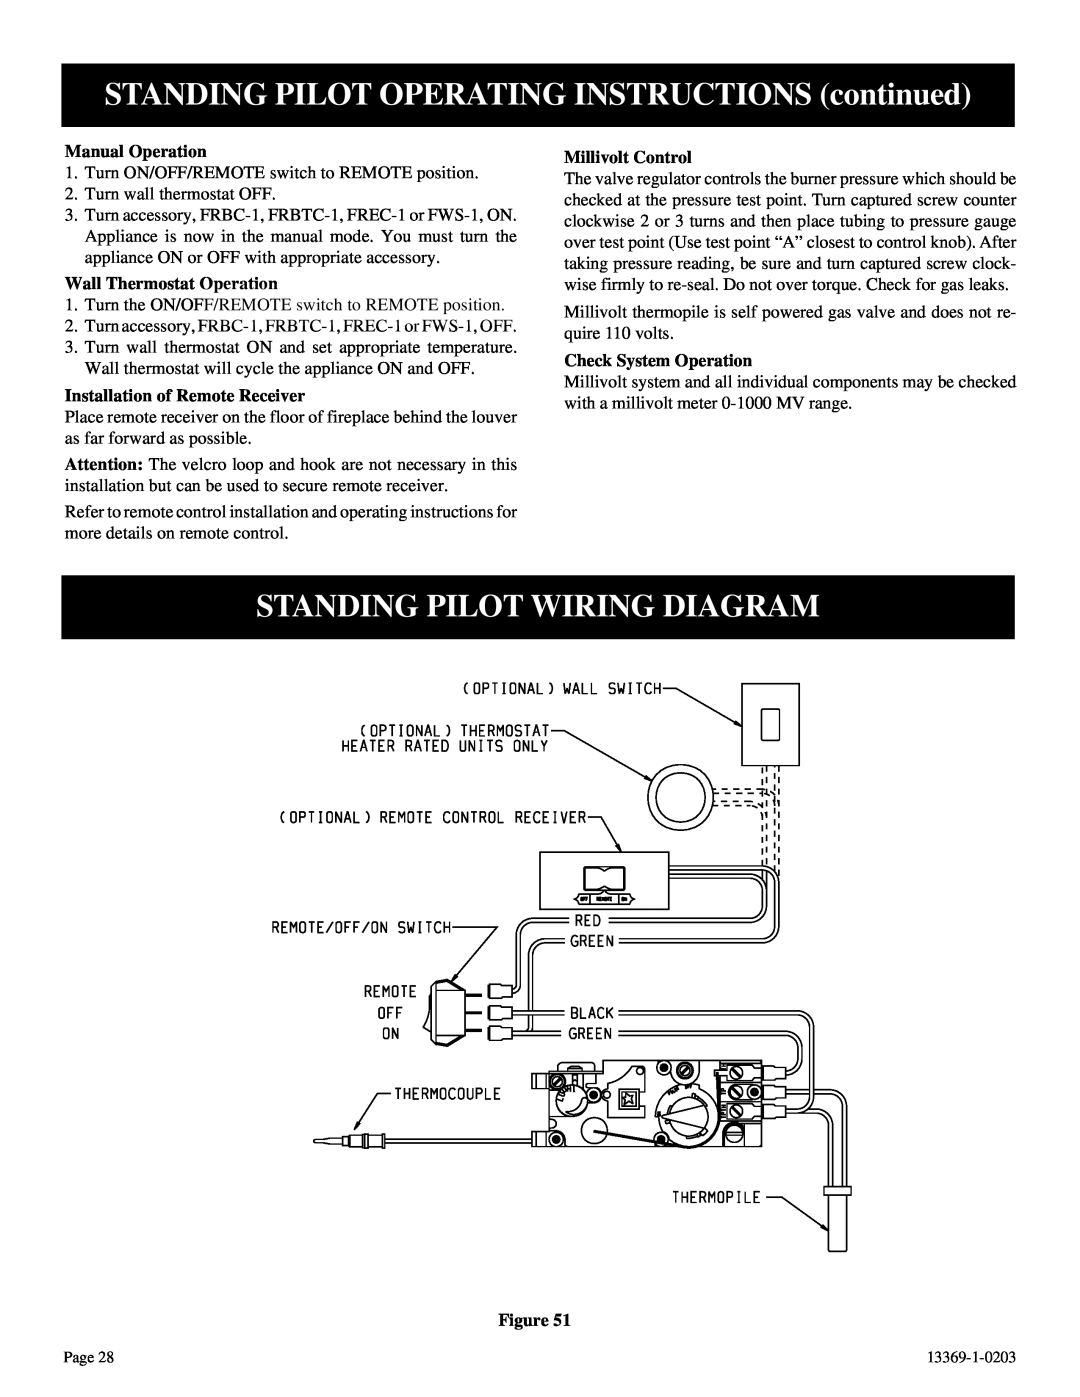 DVS 30-2 STANDING PILOT OPERATING INSTRUCTIONS continued, Standing Pilot Wiring Diagram, Manual Operation 